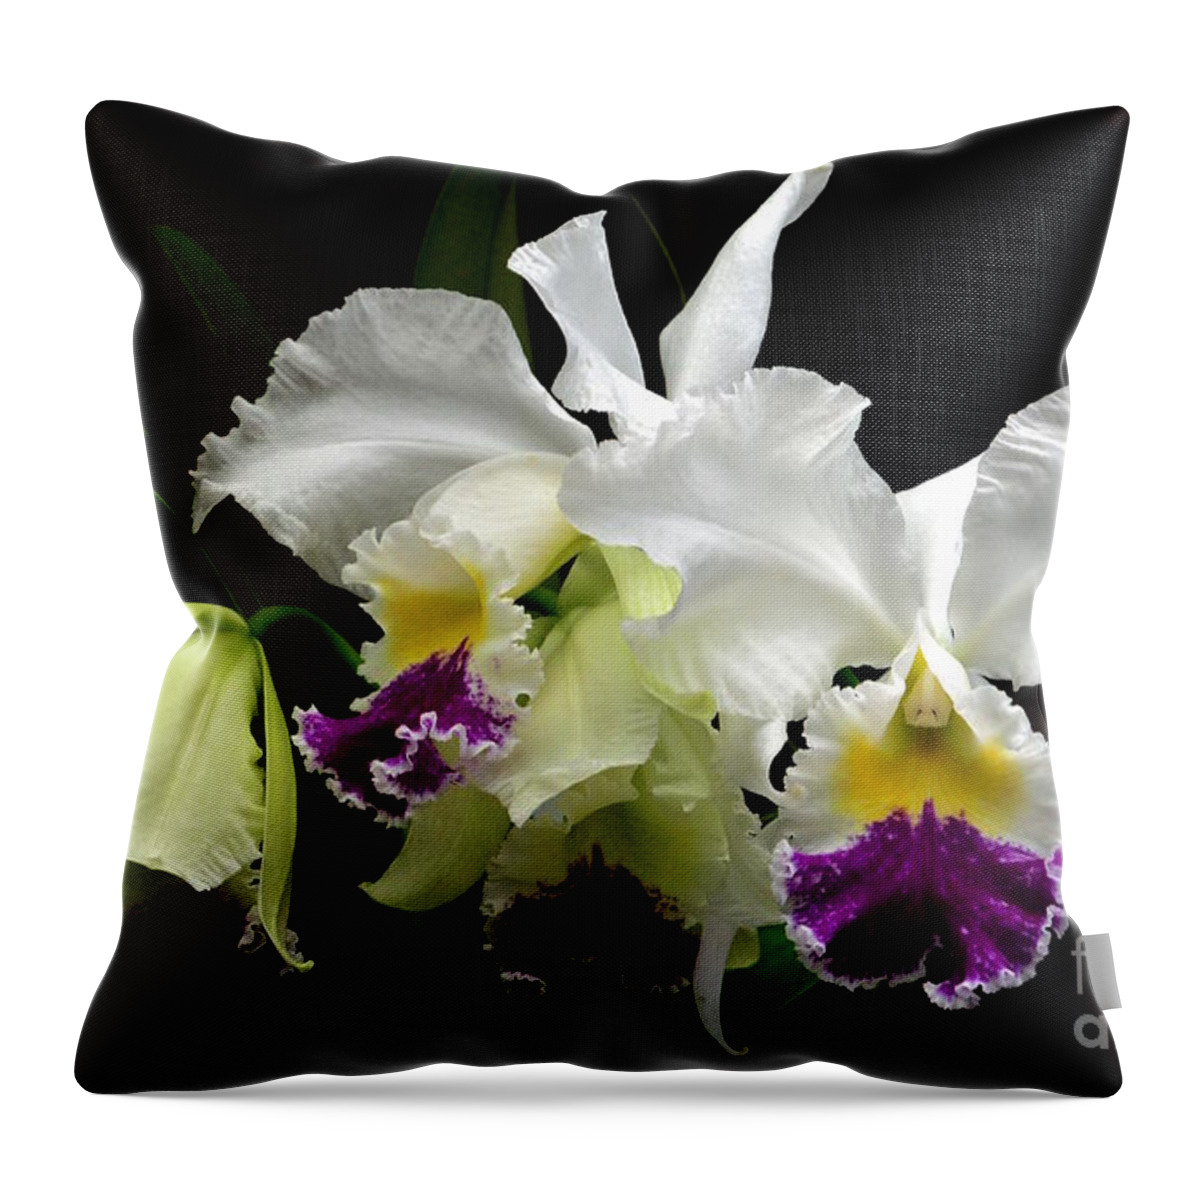 Anniversaries Throw Pillow featuring the photograph Beautiful White Orchids by Jeannie Rhode